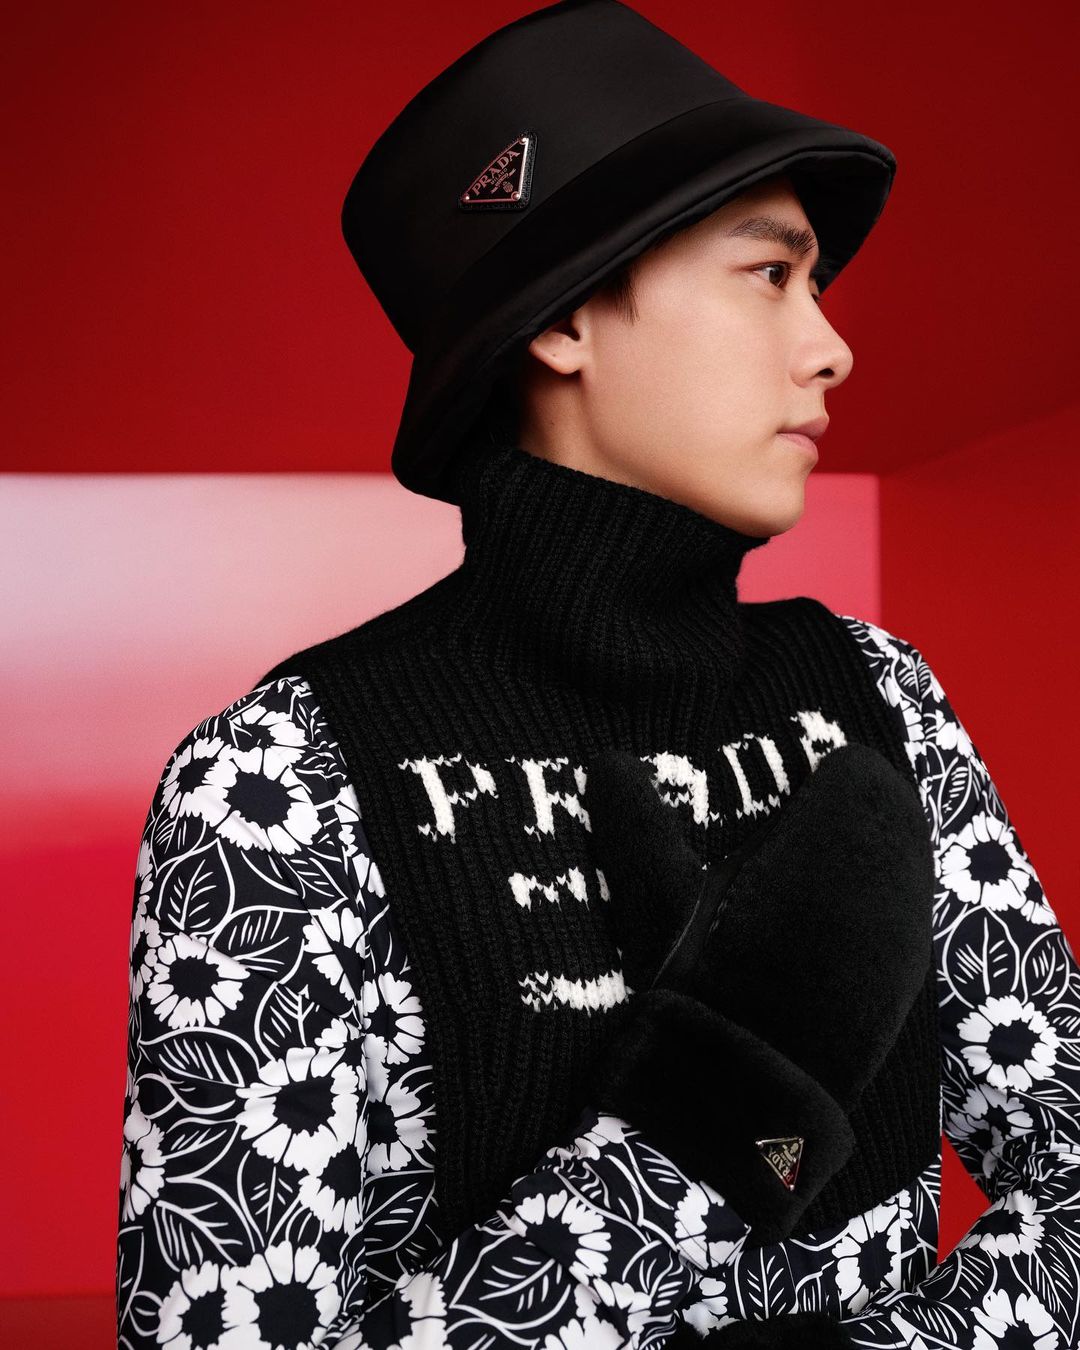 Prada The Action in the Year of the Tiger campaign